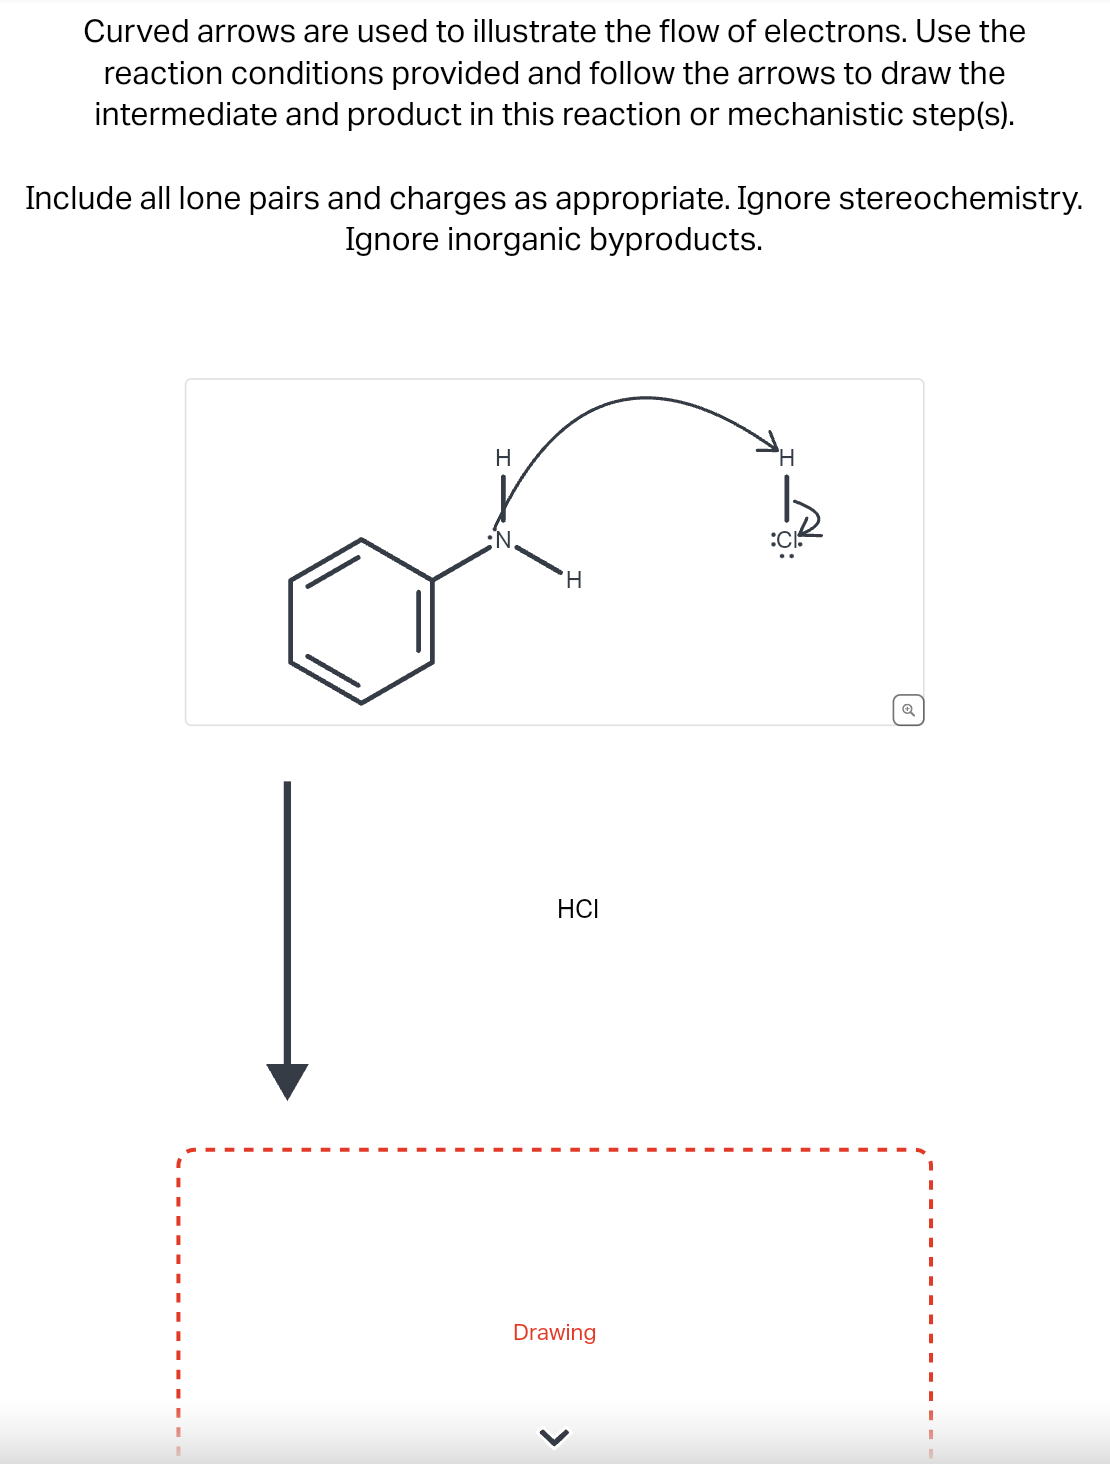 Curved arrows are used to illustrate the flow of electrons. Use the
reaction conditions provided and follow the arrows to draw the
intermediate and product in this reaction or mechanistic step(s).
Include all lone pairs and charges as appropriate. Ignore stereochemistry.
Ignore inorganic byproducts.
I
I
I
I
H
N.
H
HCI
Drawing
H
o
I
I
I
I
I